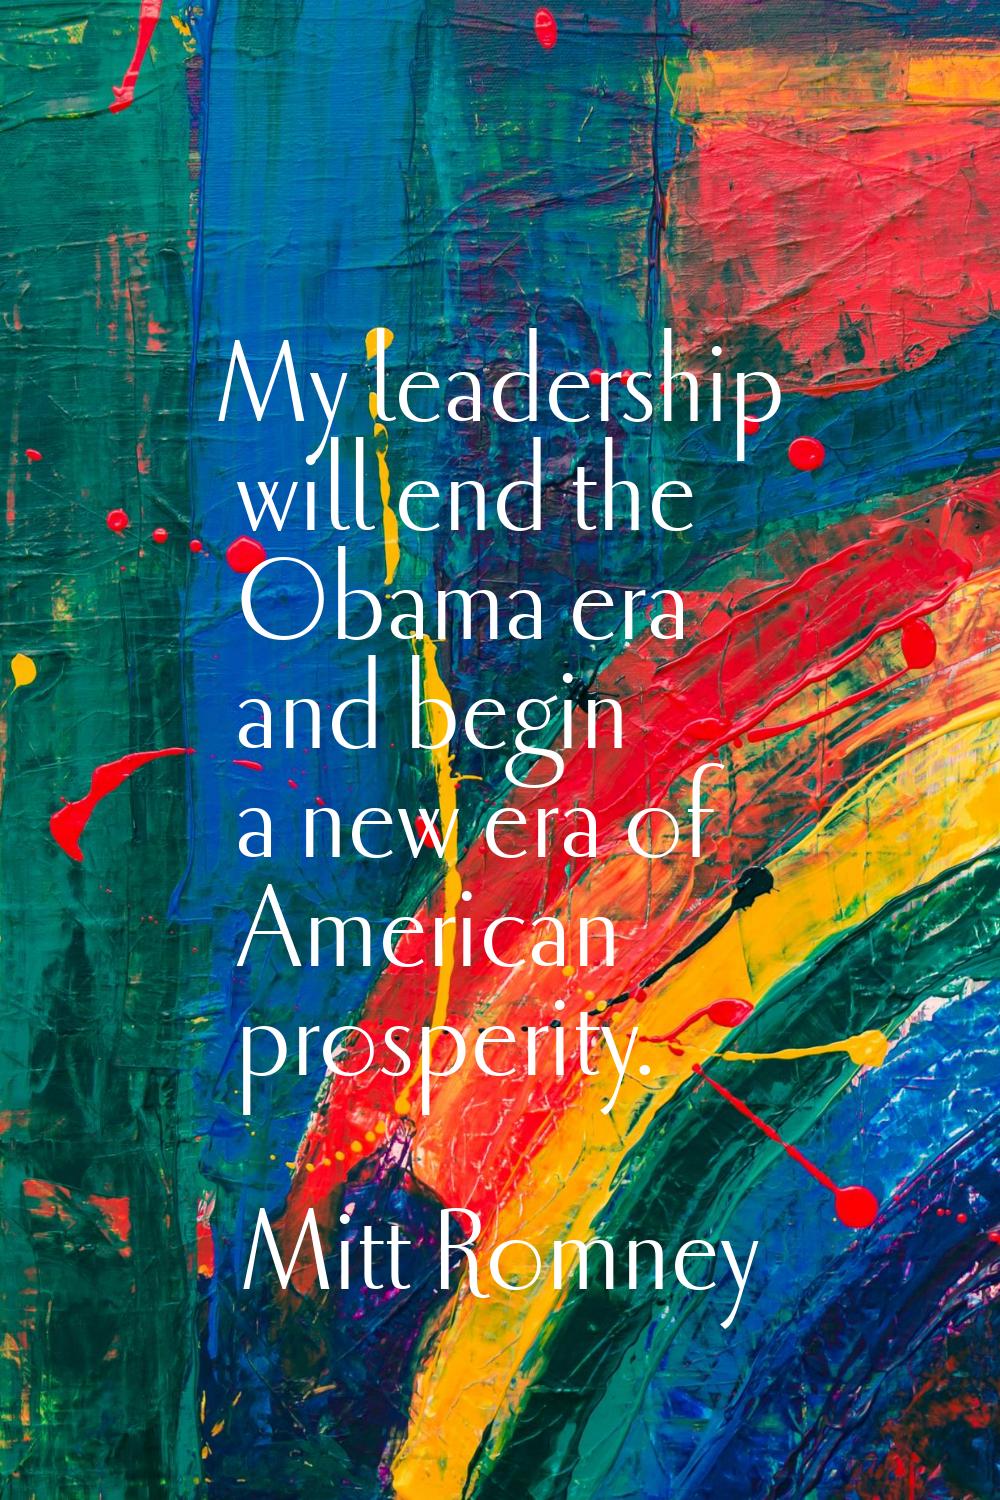 My leadership will end the Obama era and begin a new era of American prosperity.